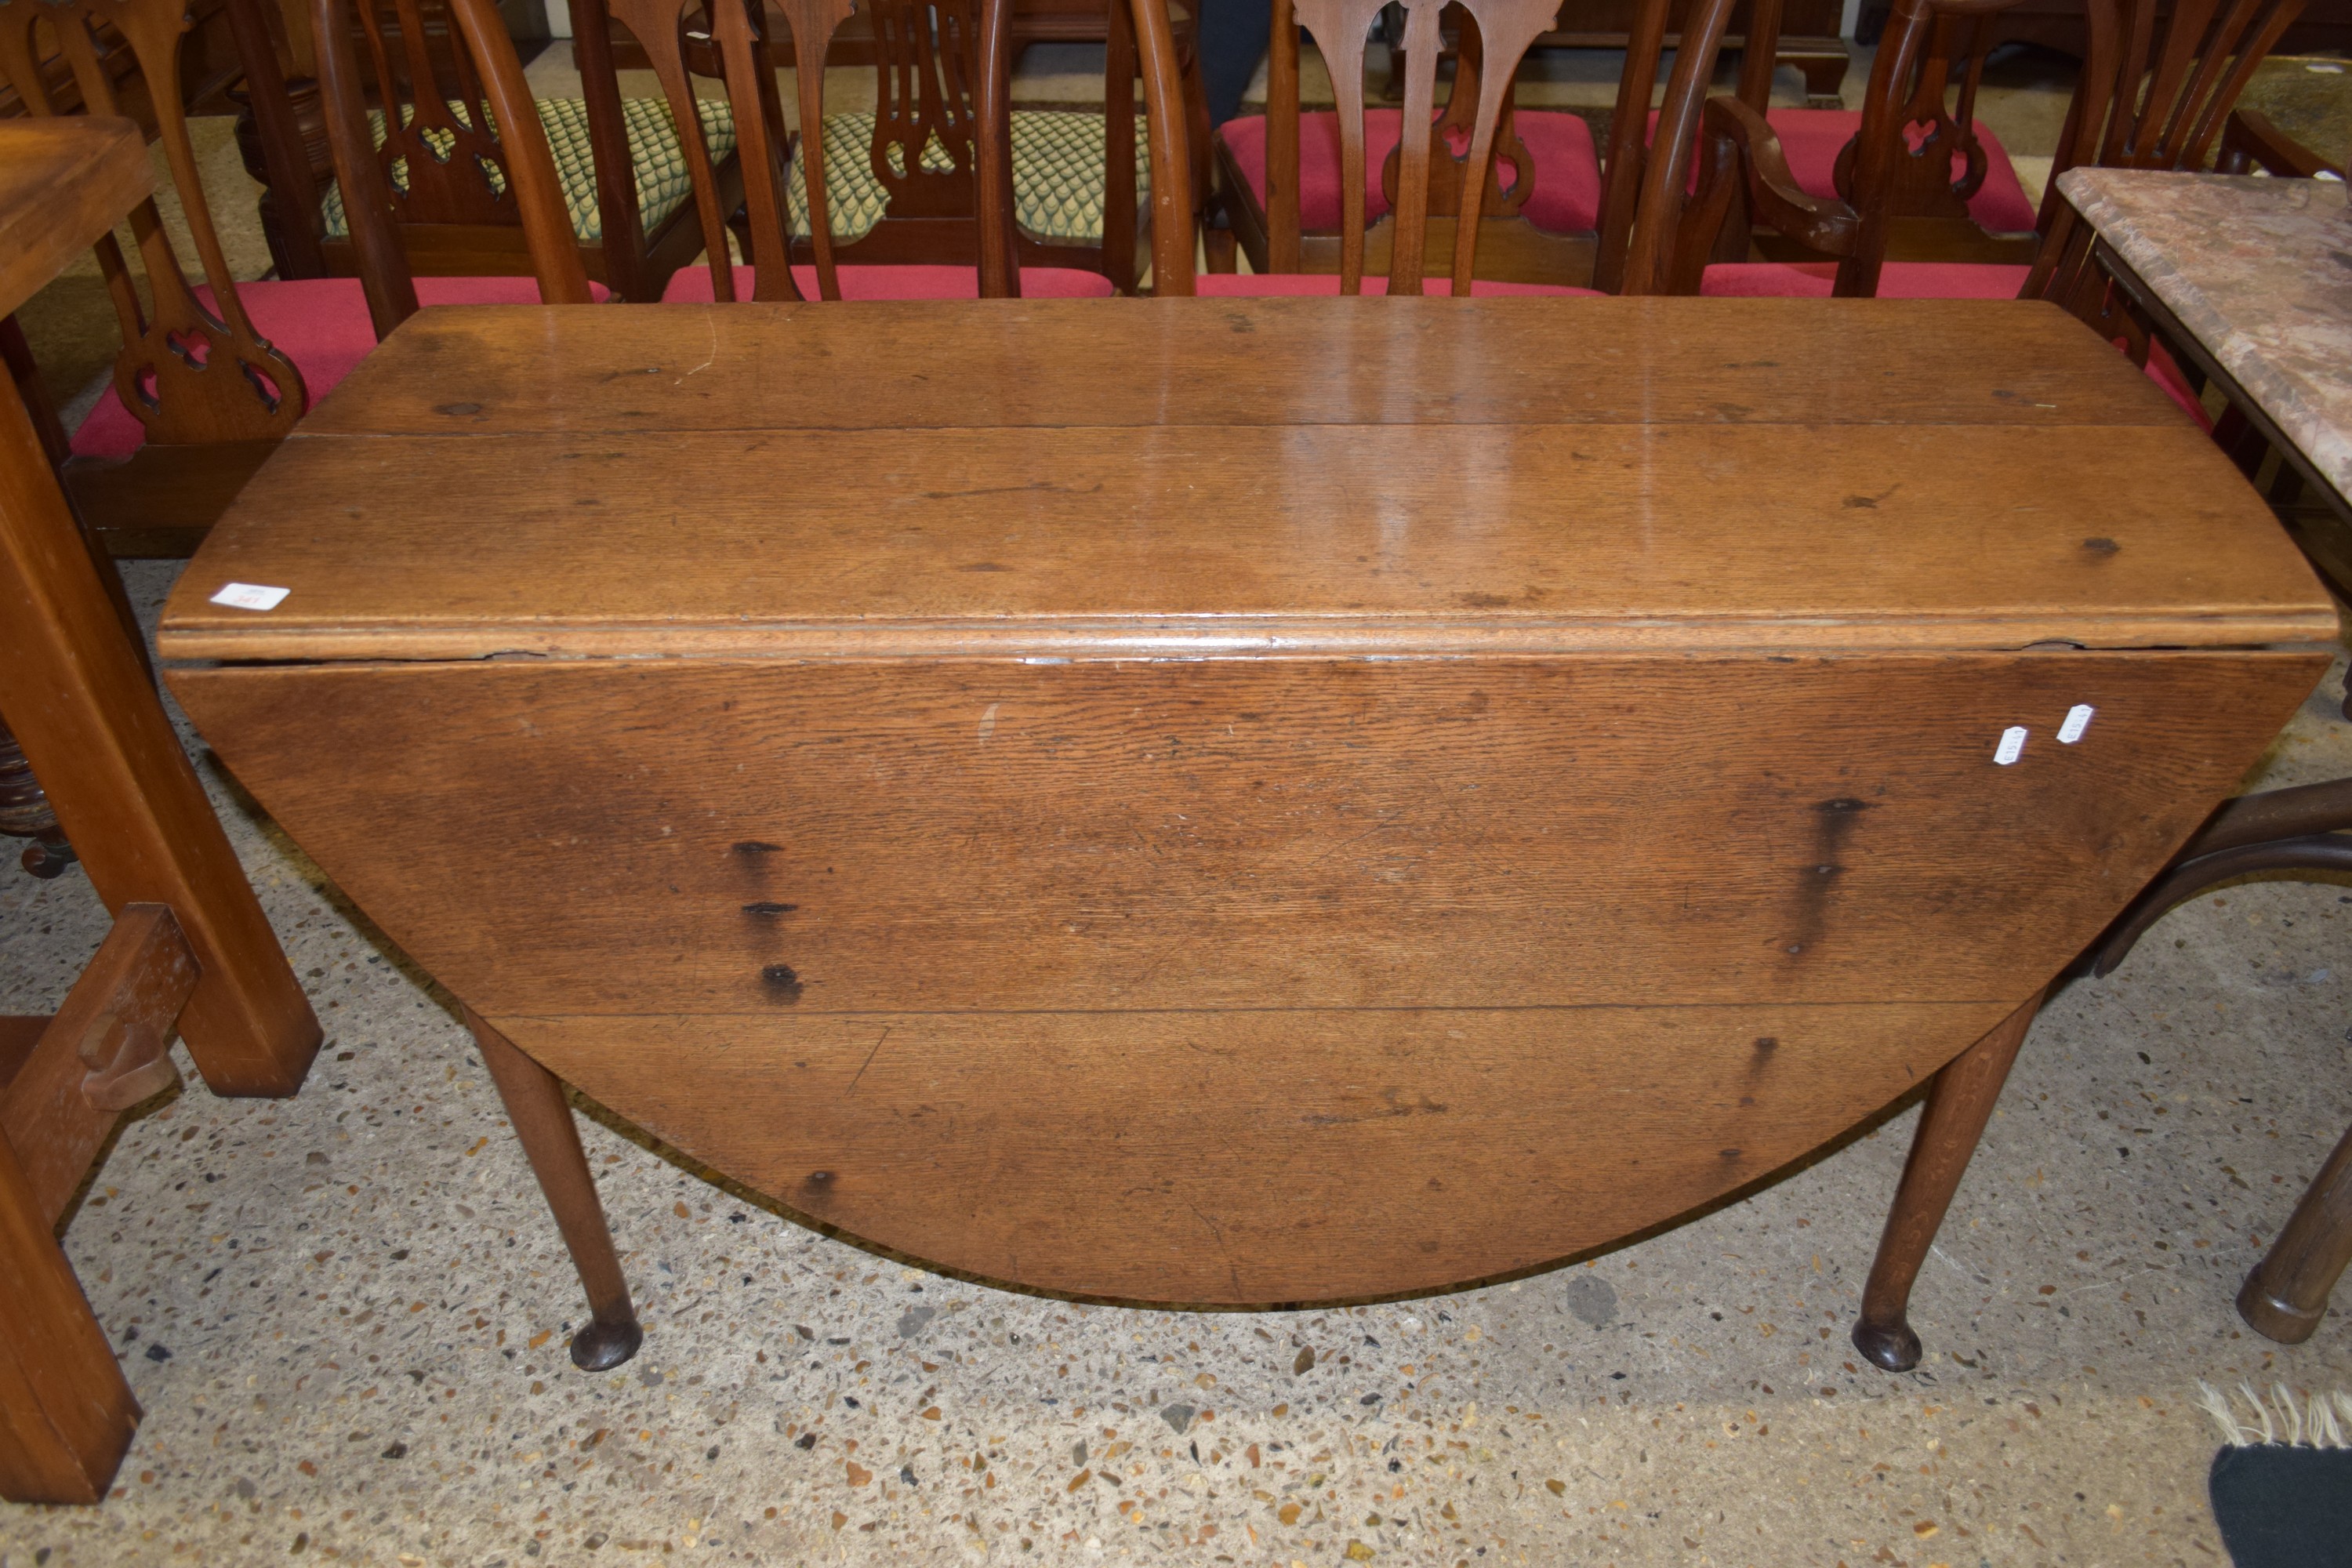 GOOD QUALITY STAINED WOOD OVAL DROP LEAF TABLE, 147CM X 122CM